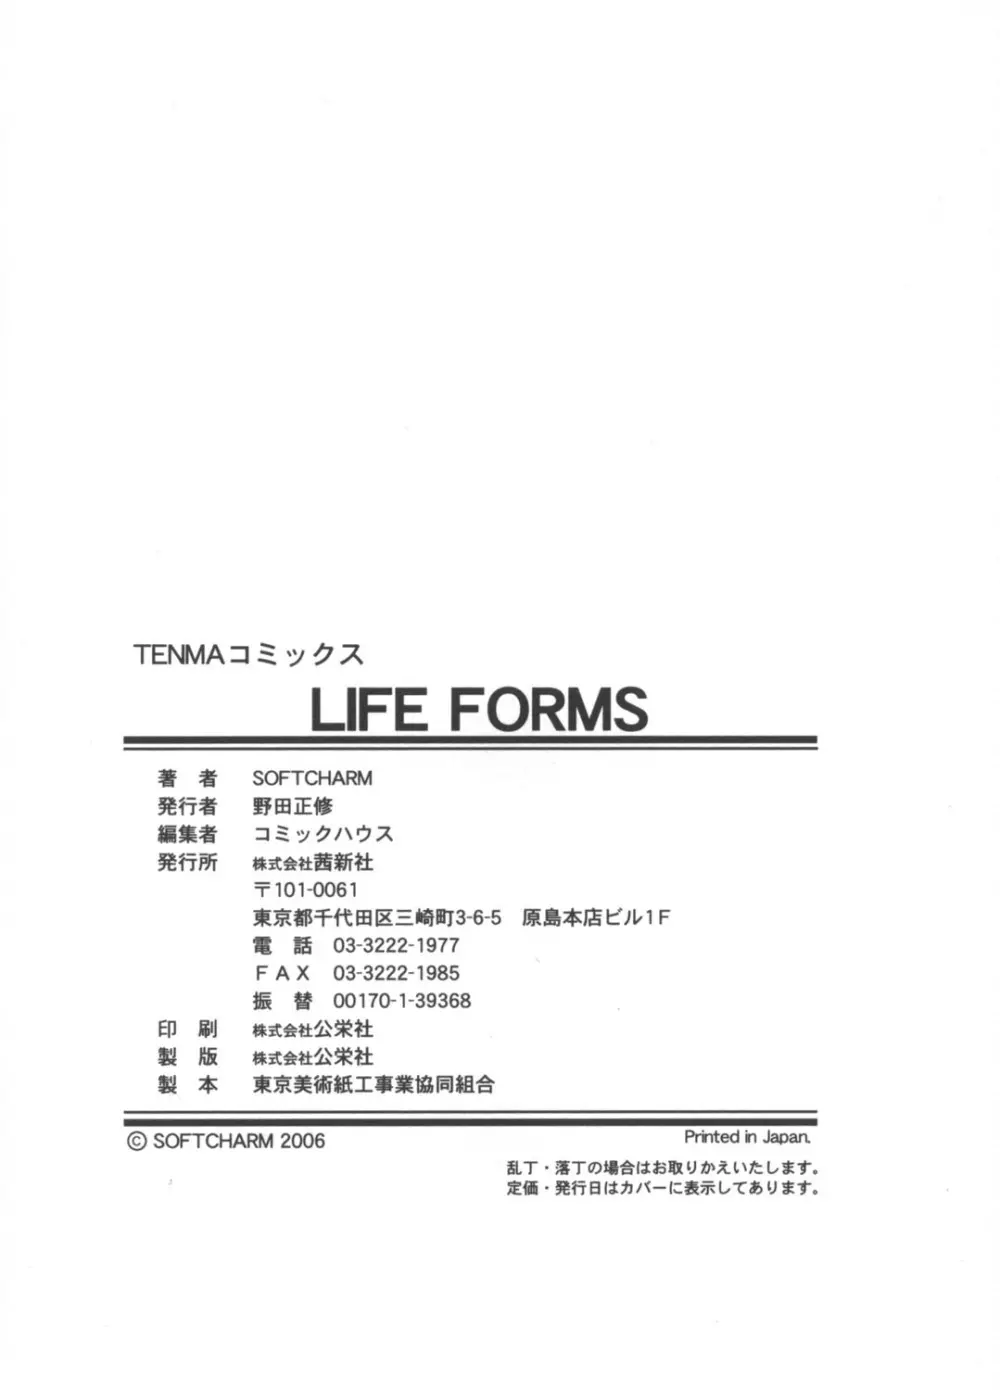 LIFE FORMS 200ページ